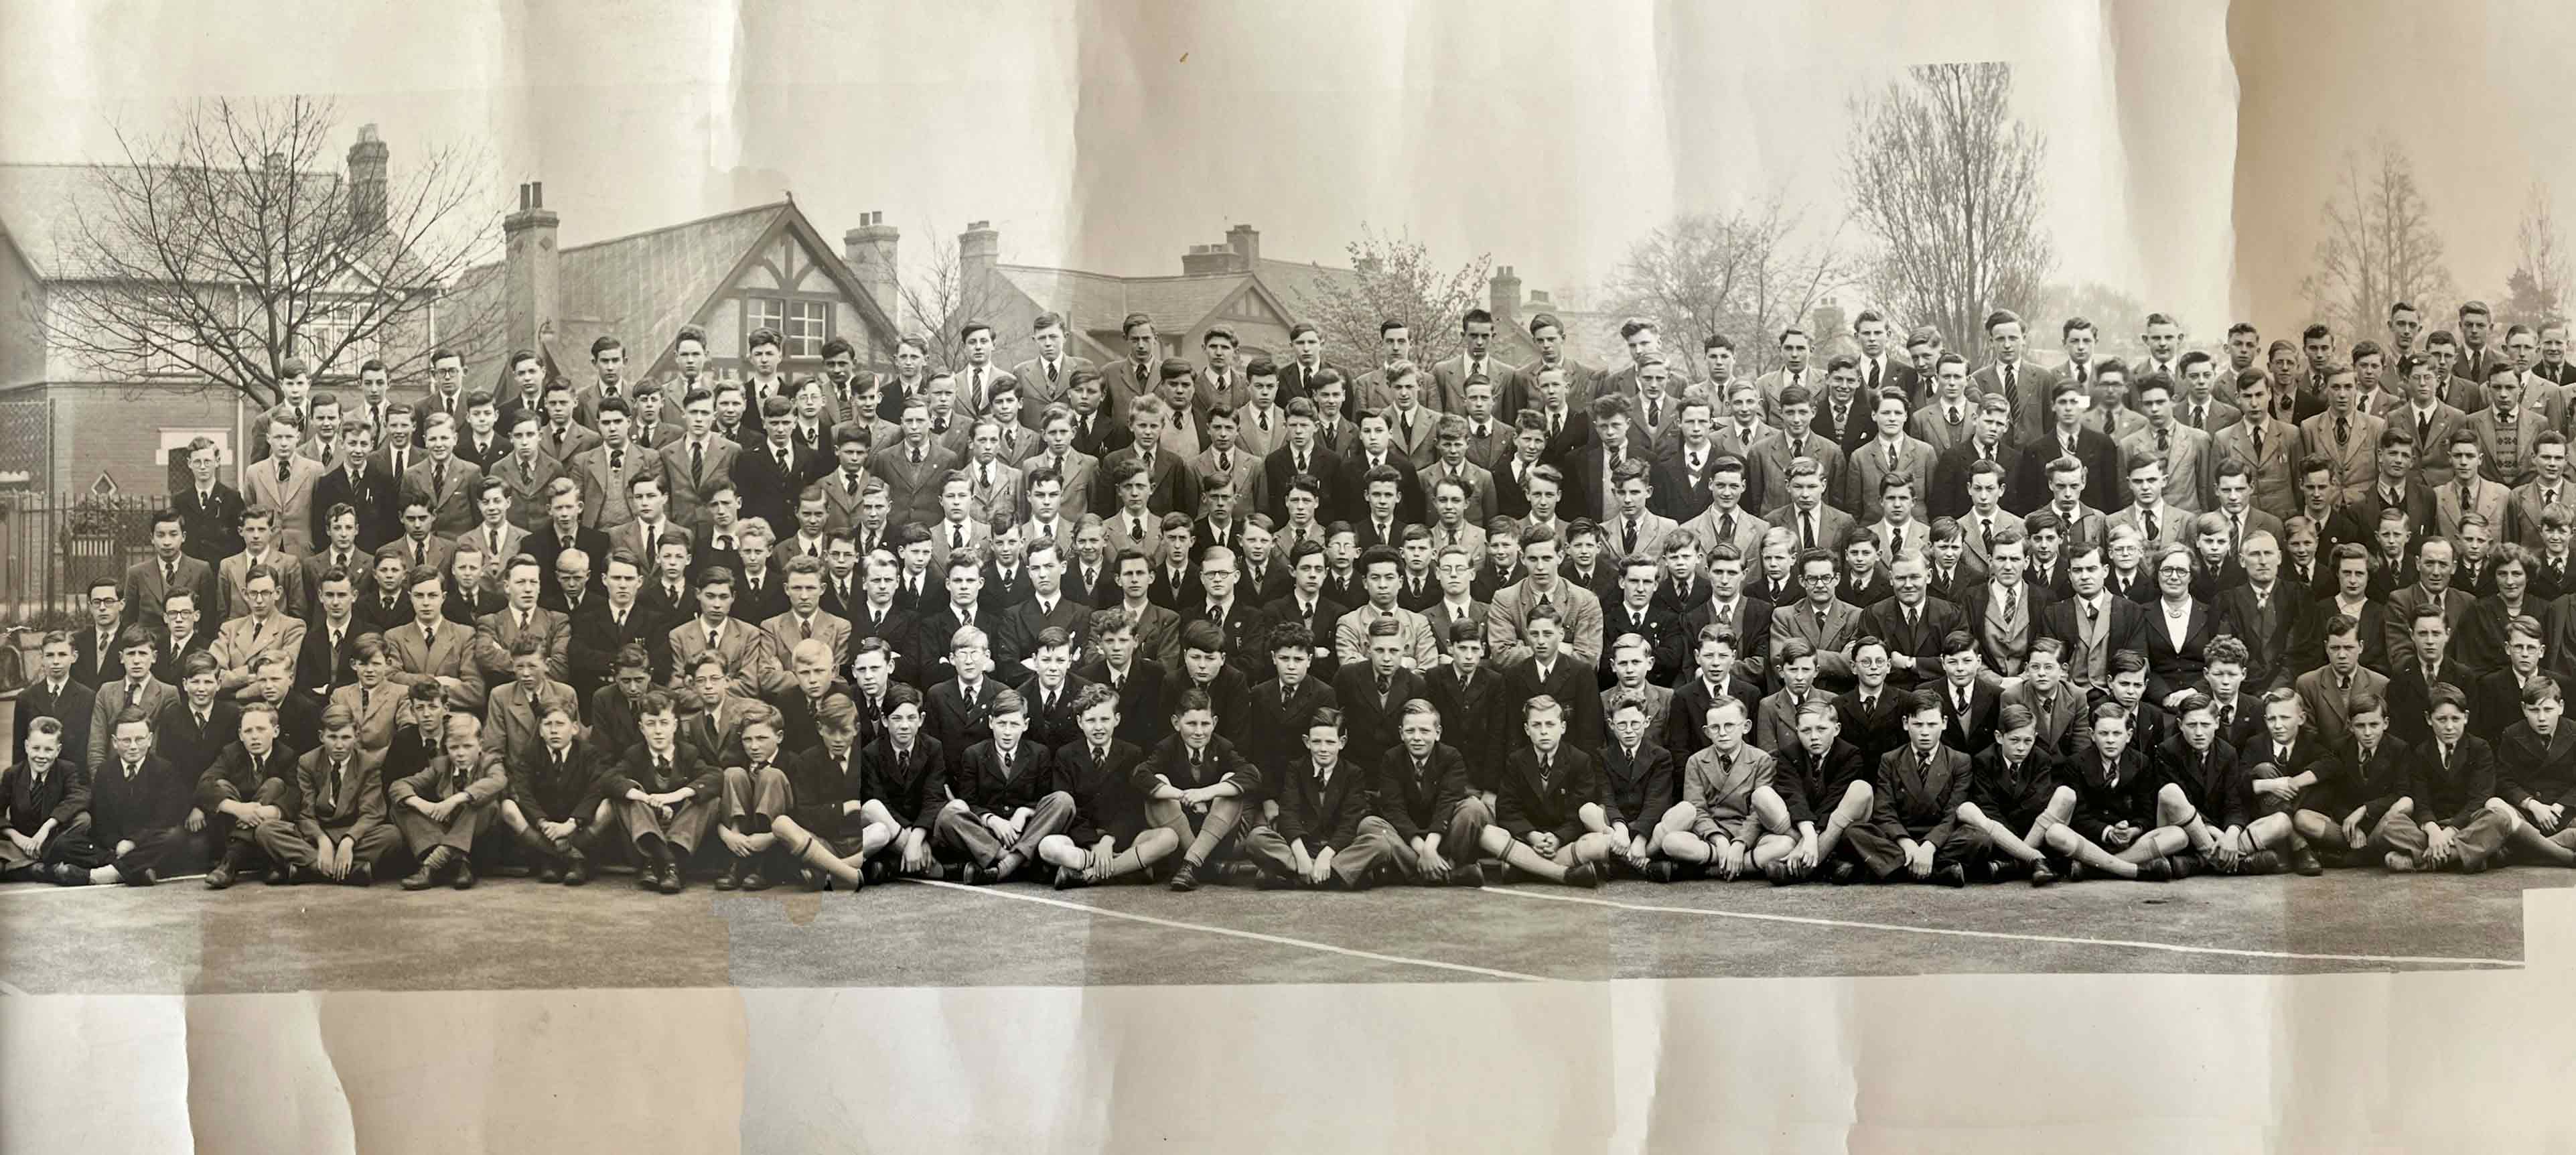 the 1953 Left hand side of  School Photograph